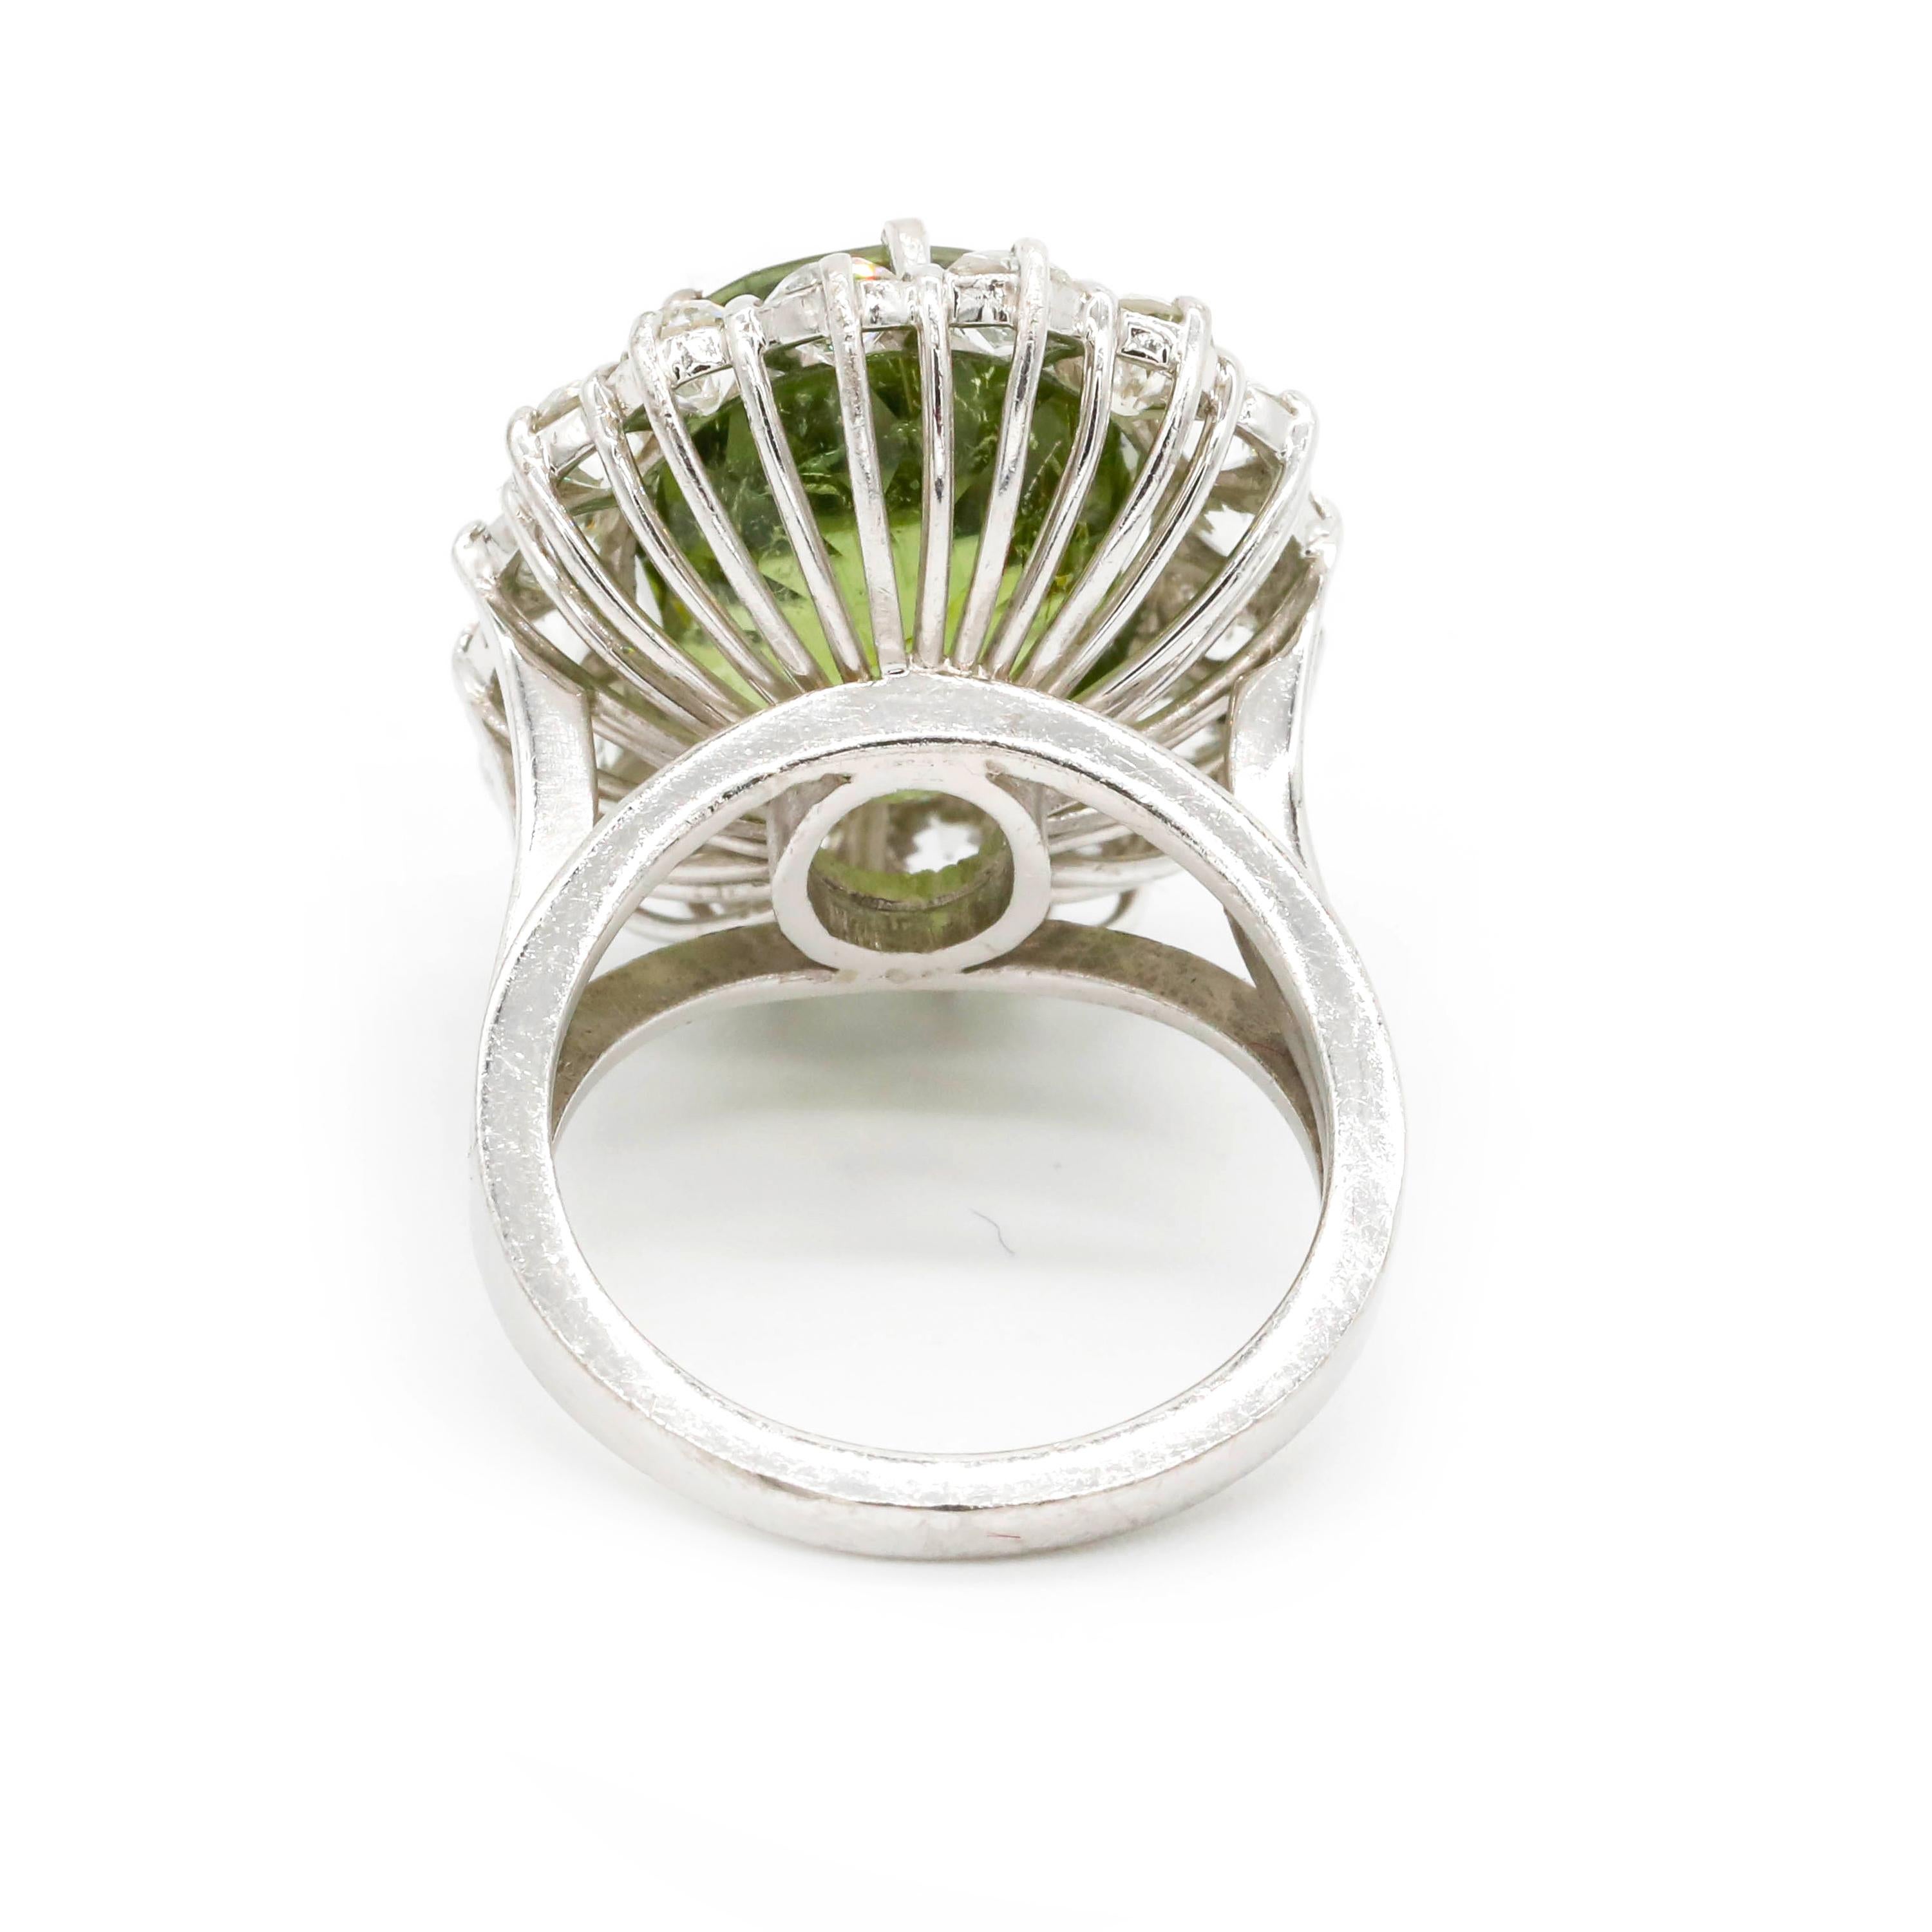 Contemporary 10 Carat Green Tourmaline and Diamond Ring Platinum Solitaire Cocktail Ring For Sale